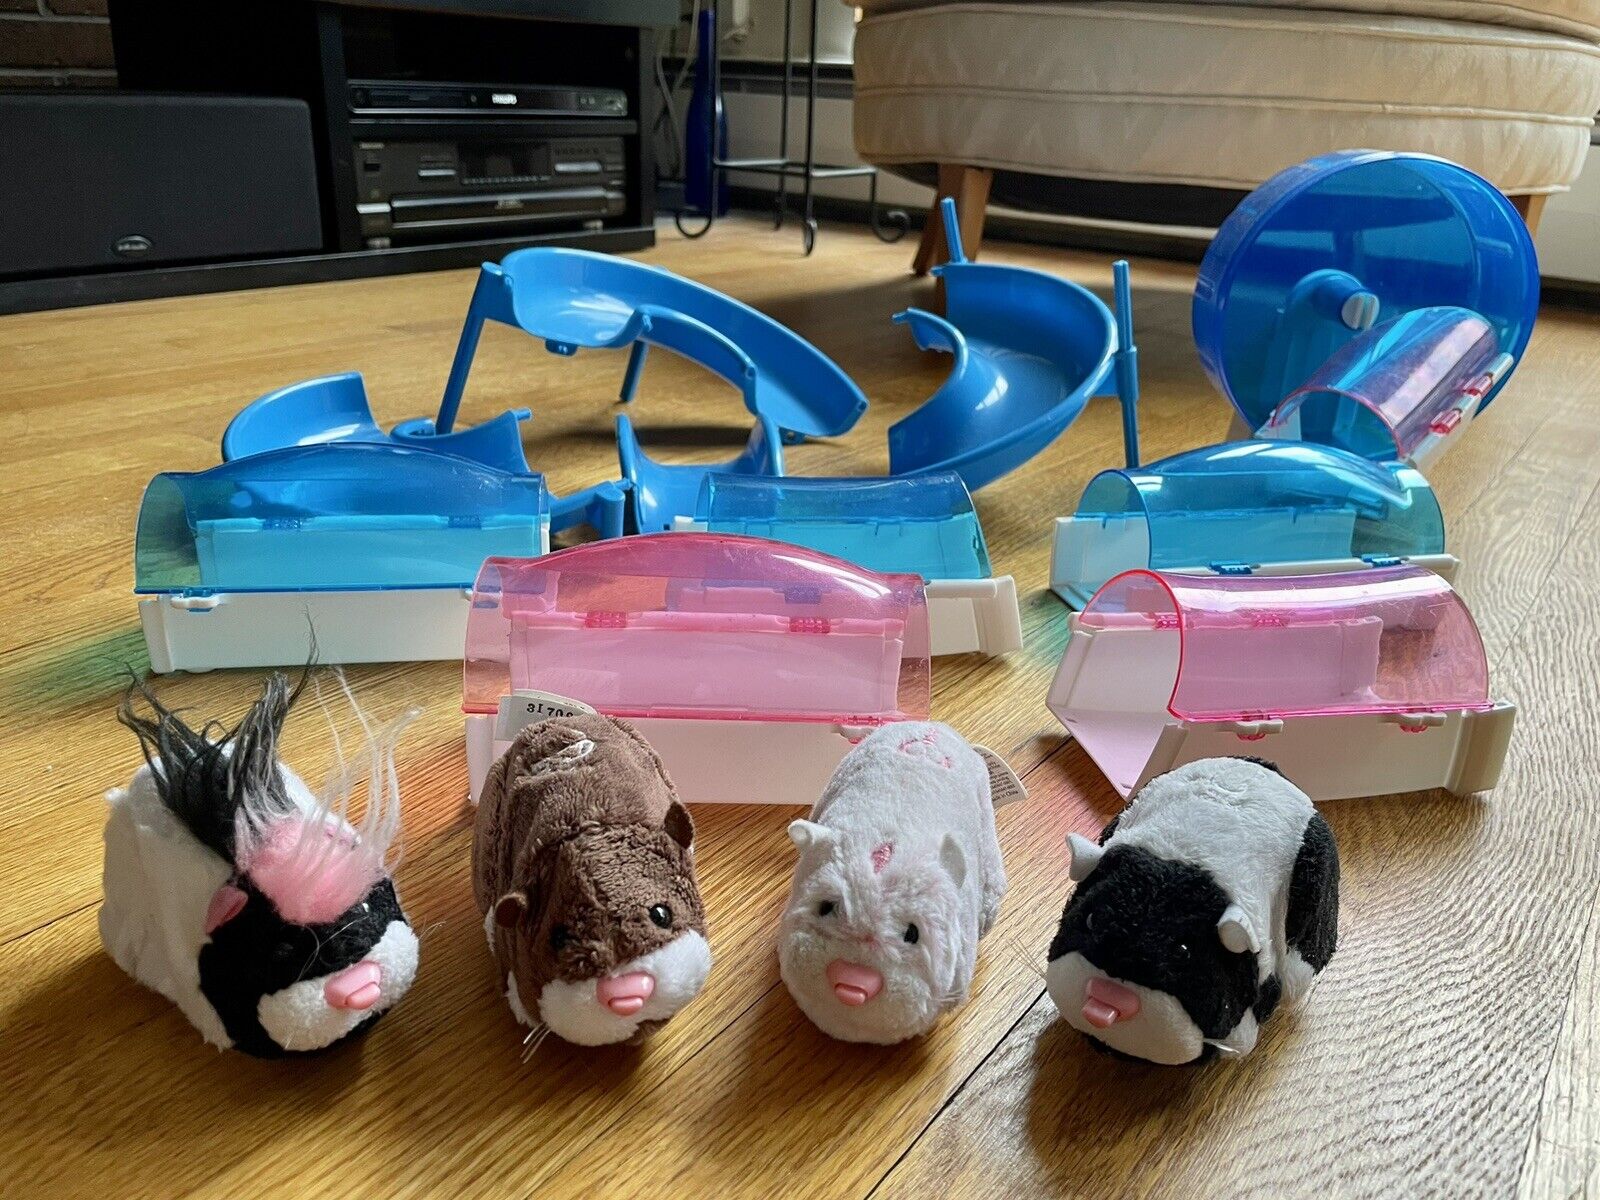 Zhu Zhu Pets Lot Of 4 Toy Hamsters with tunnels, wheel, as on pics. Sold as is.